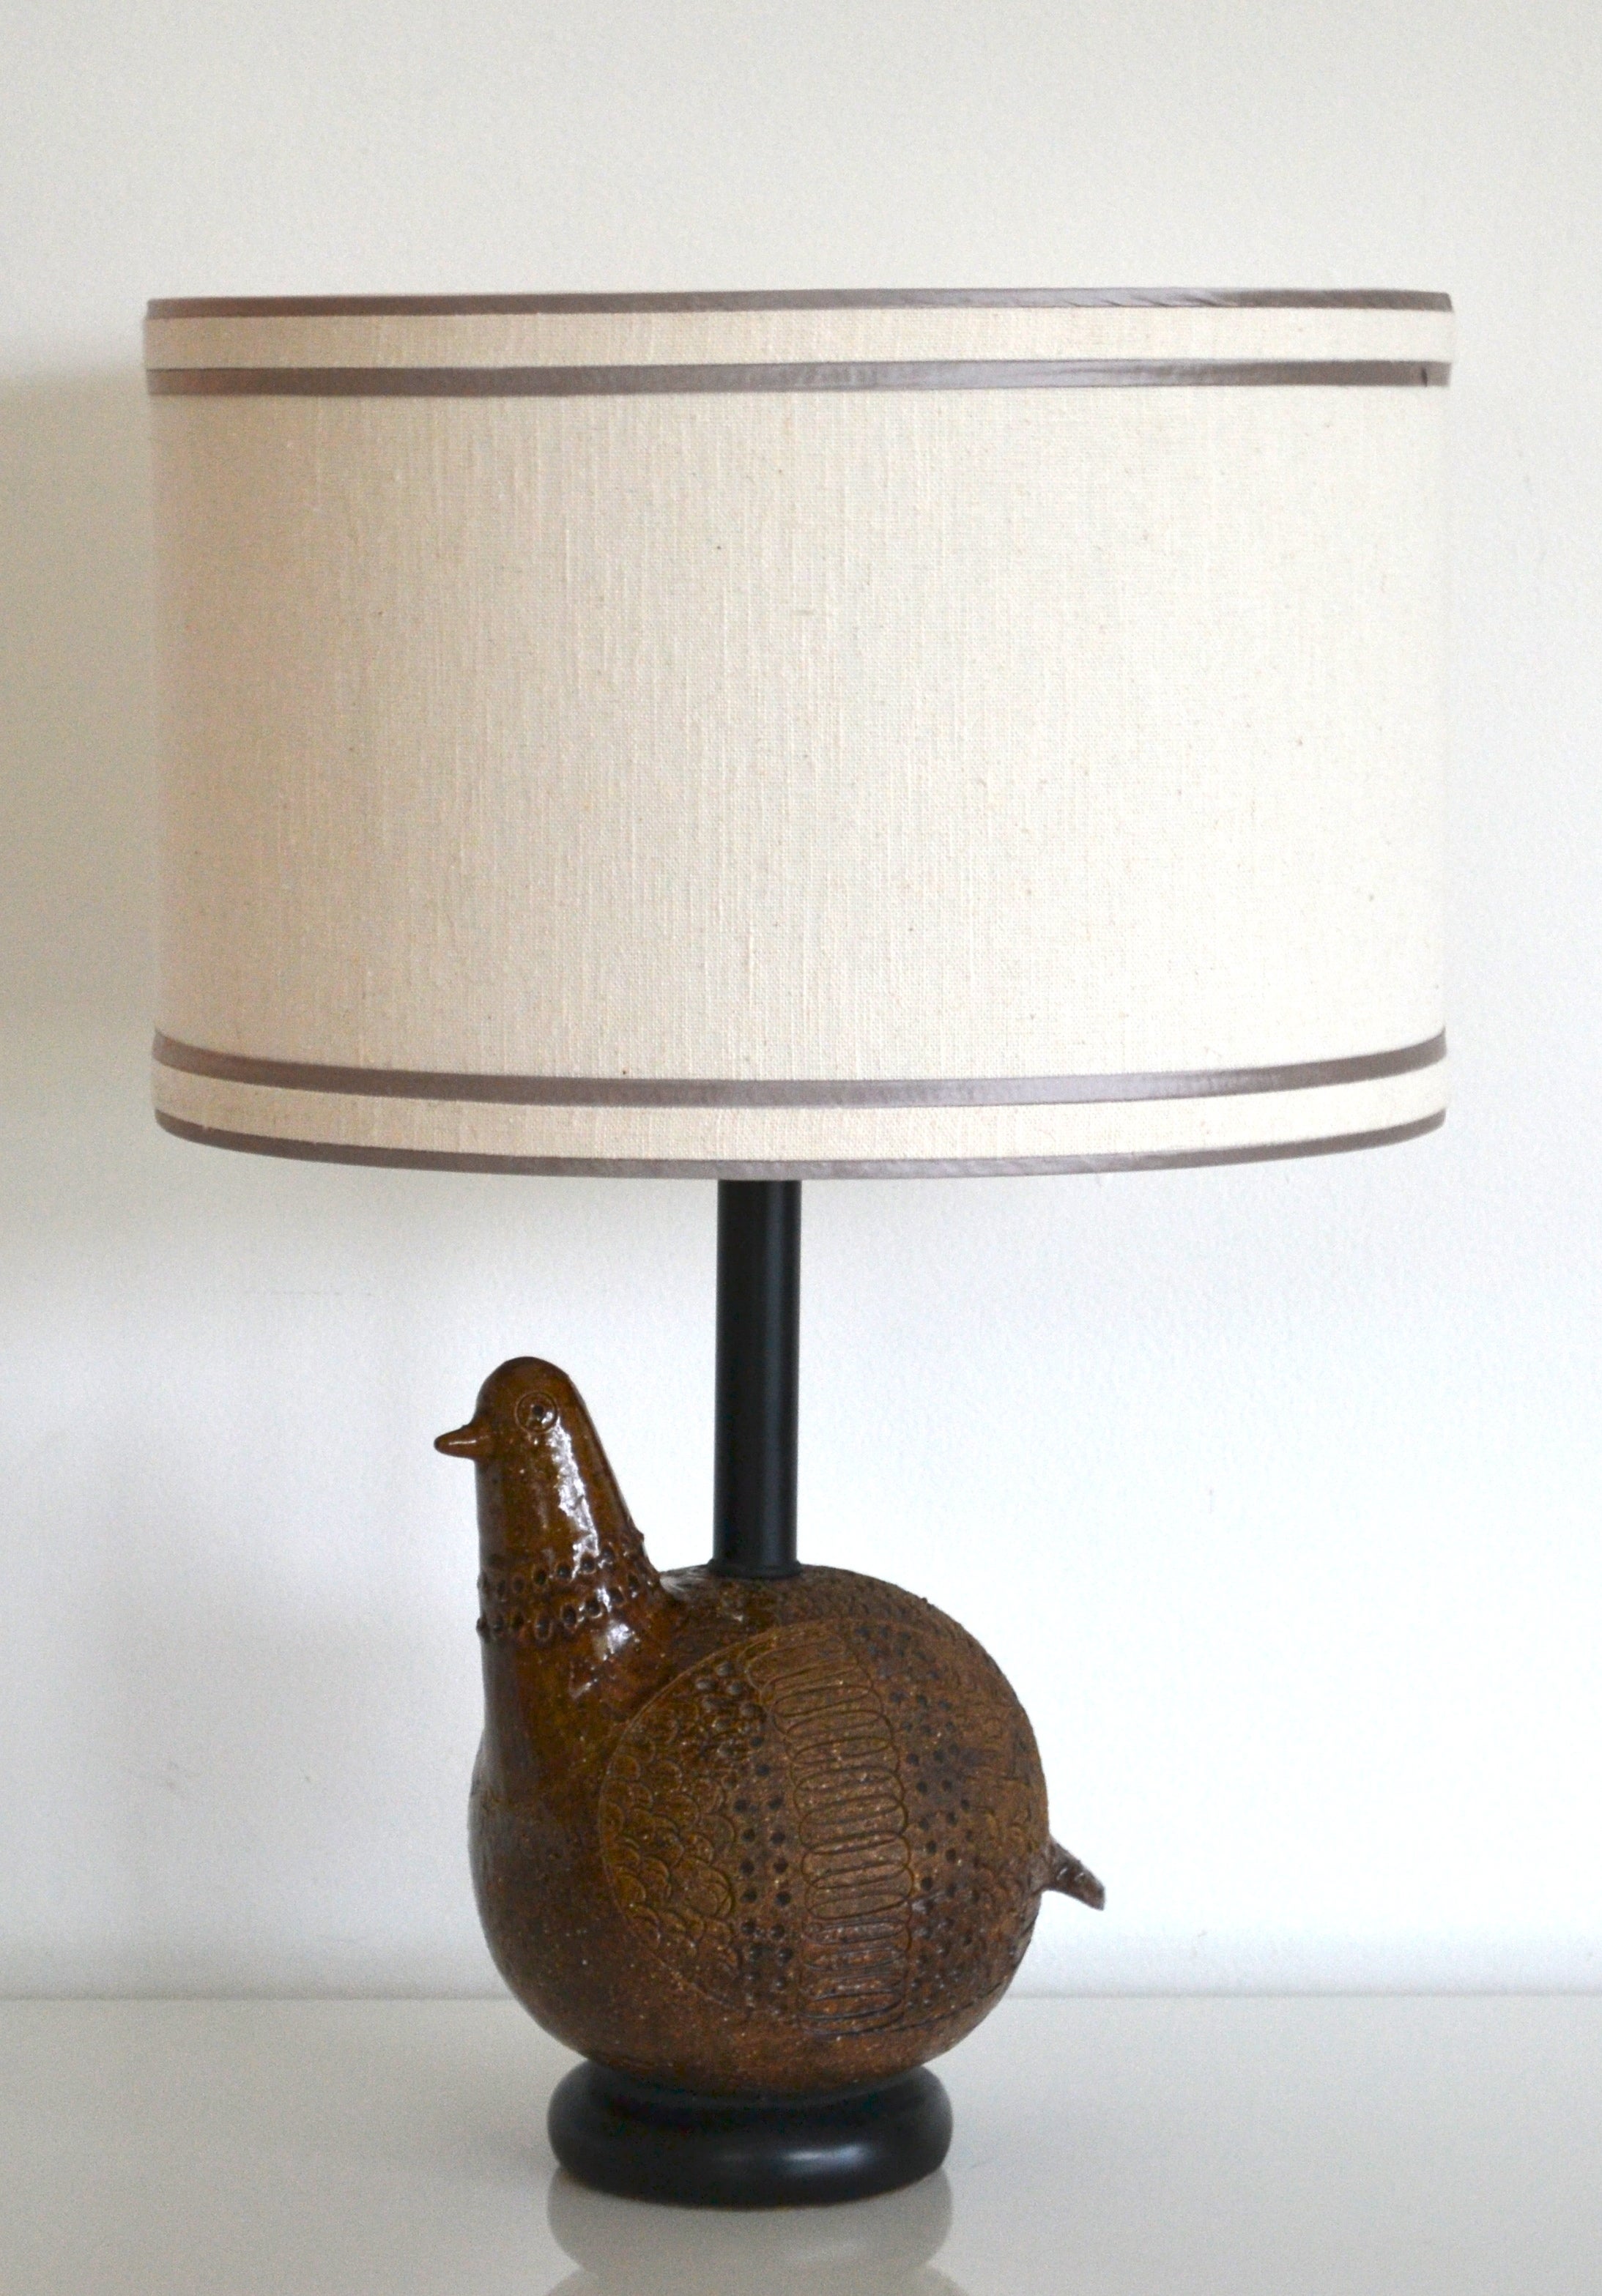 Ceramic Partridge Form Table Lamp by Bitossi